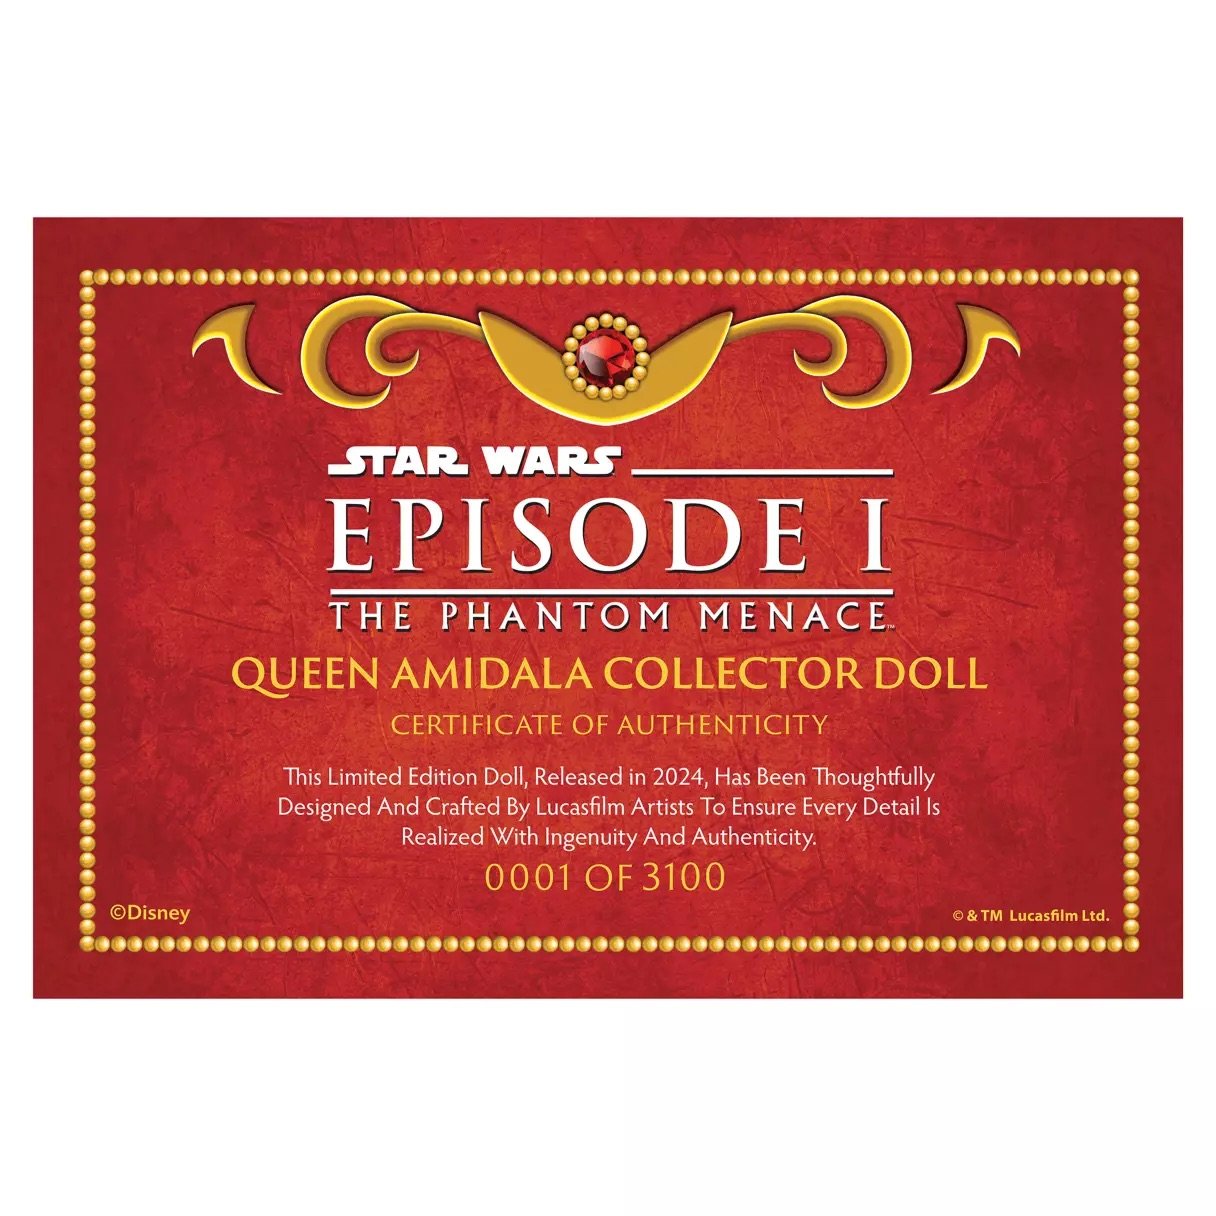 Queen Amidala Limited Edition Doll Disney Store Star Wars Episode 1 The Phantom Menace Merchandise Collection May 2024 Certificate.jpeg